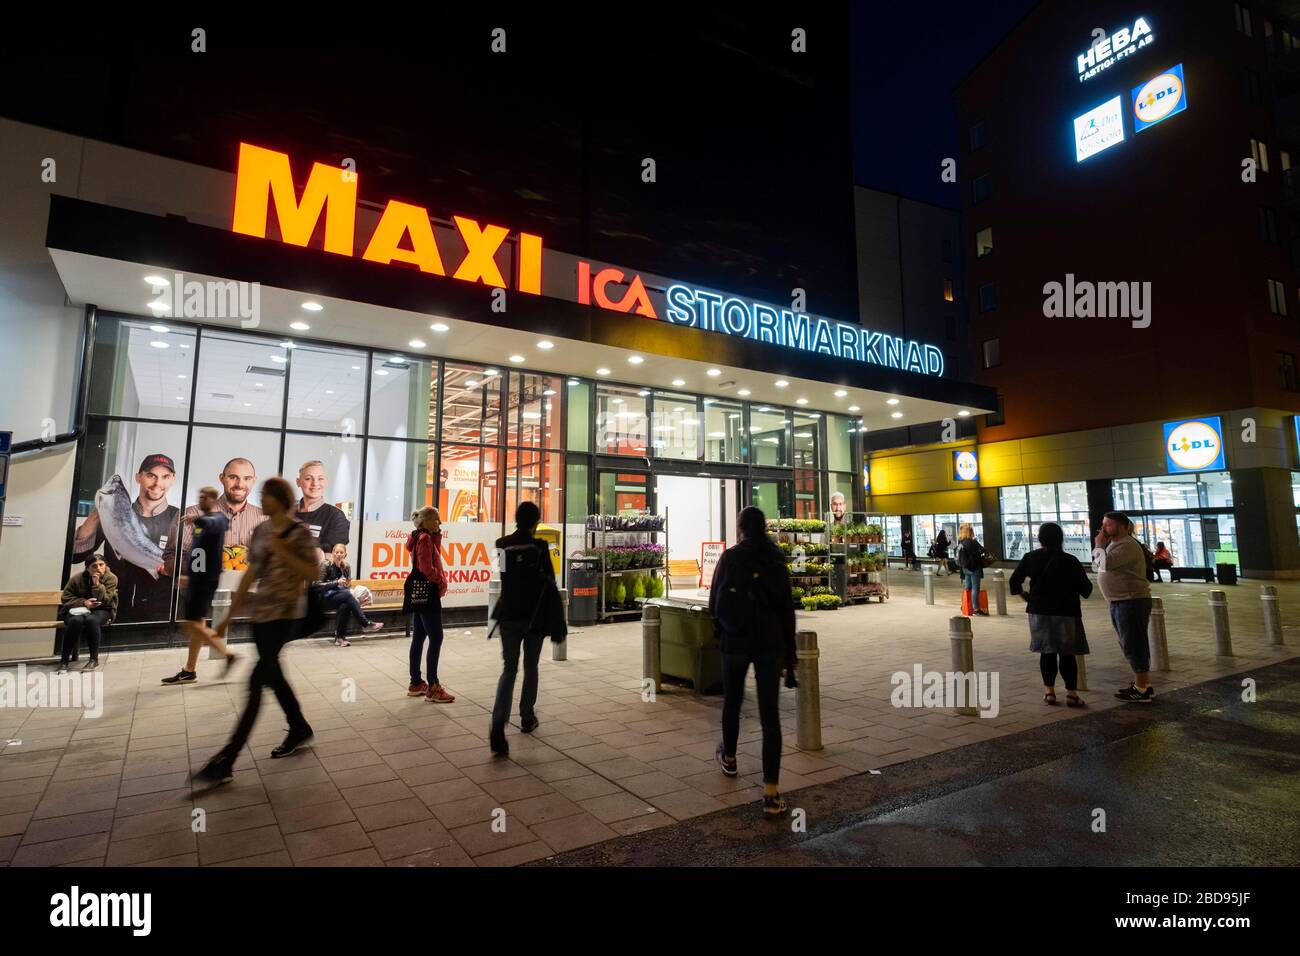 Maxi ICA Stormarknad supermarket in Stockholm, Sweden, Europe Stock Photo -  Alamy